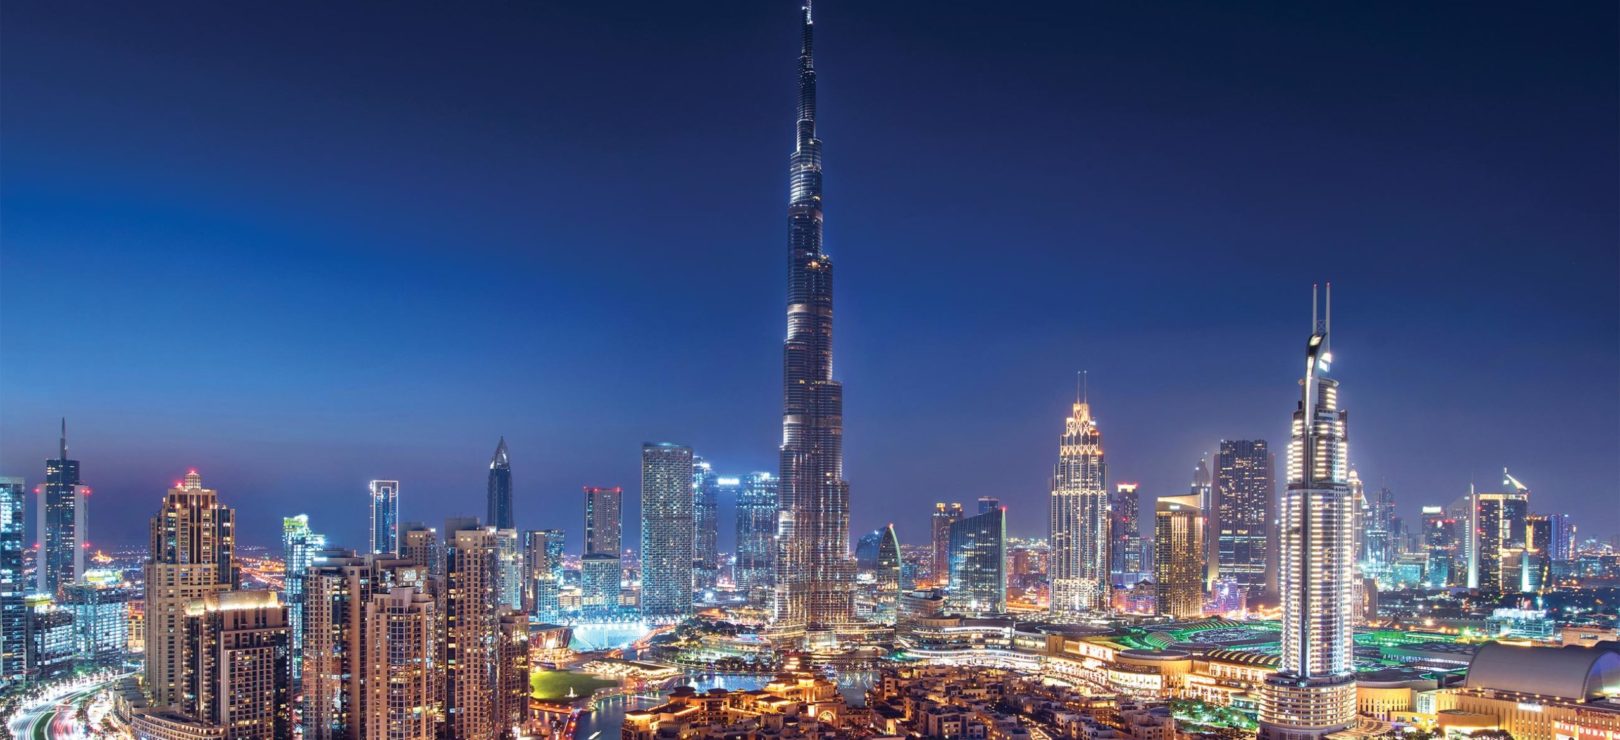 Burj Khalifa is one of the top attractions to visit in Dubai.